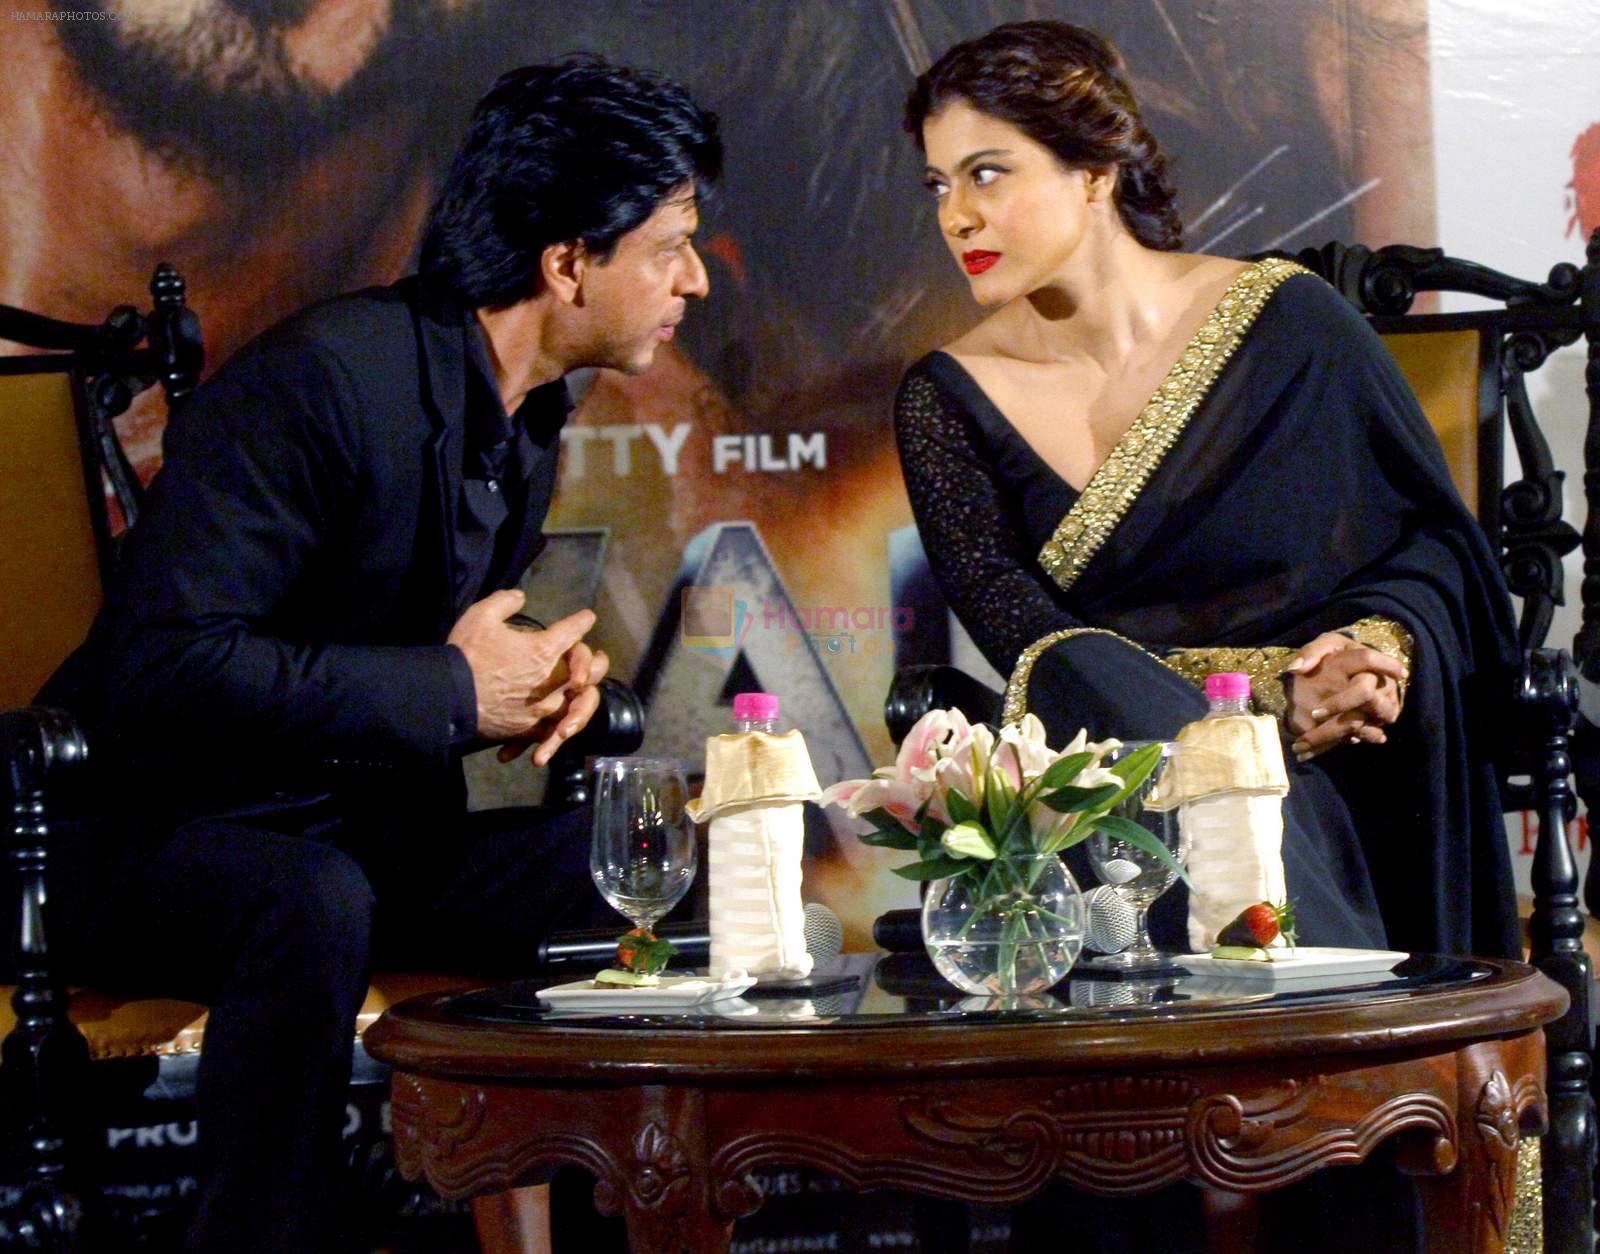 Shahrukh Khan and Kajol in Kolkatta for Dilwale promotions on 22nd Dec 2015